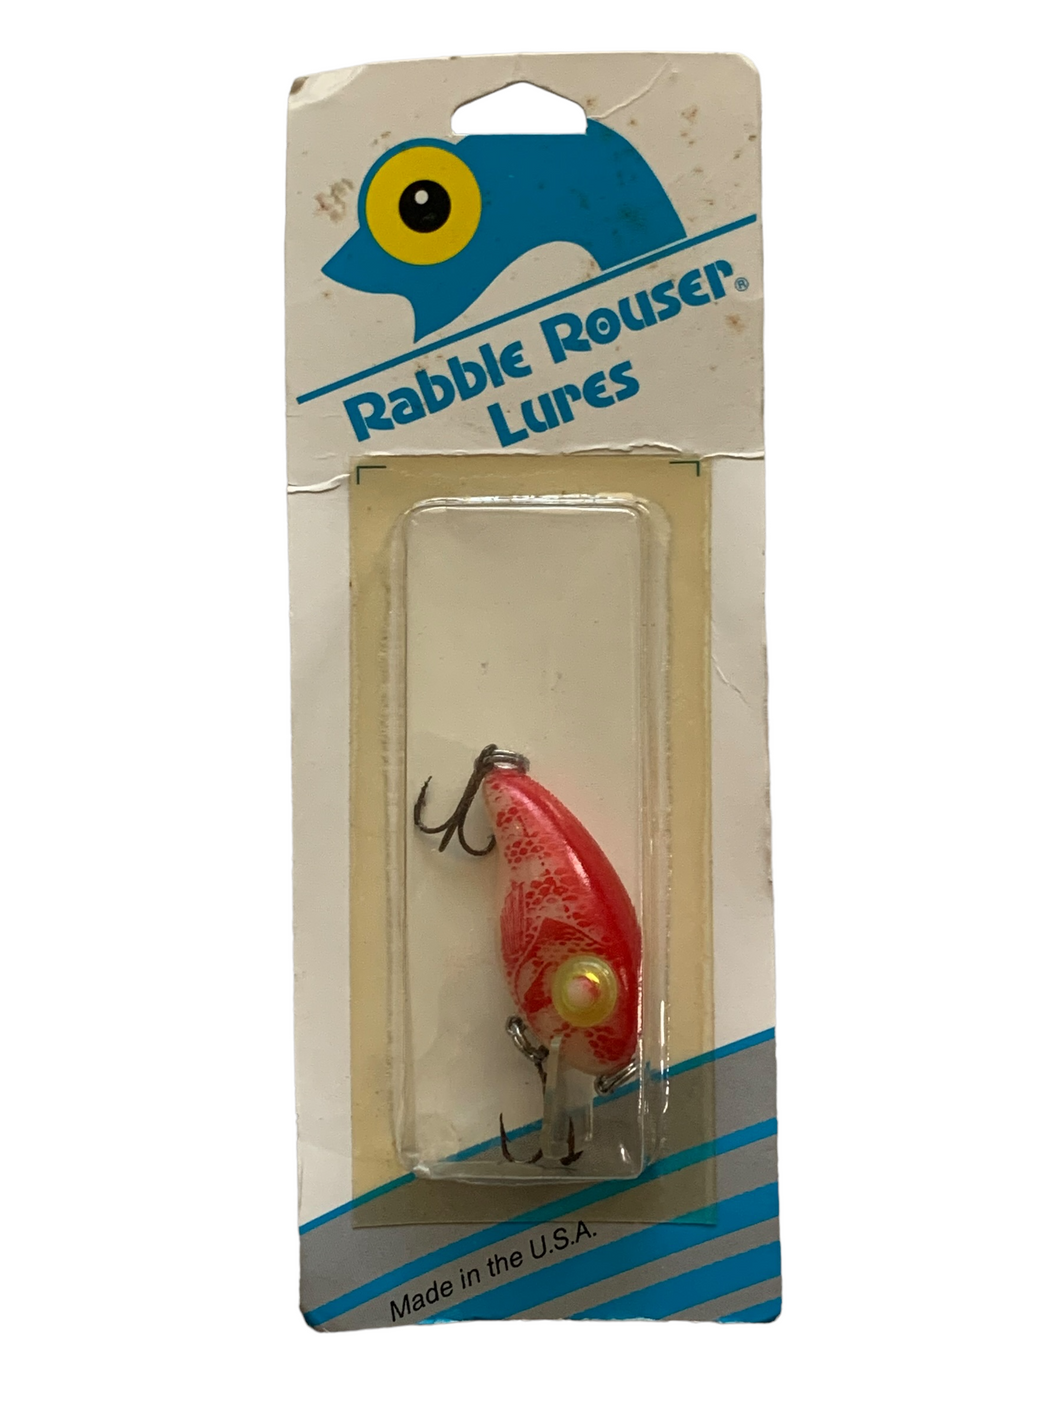 RABBLE ROUSER LURES BABY ASHLEY Fishing Lure • RED SCALE or PINK